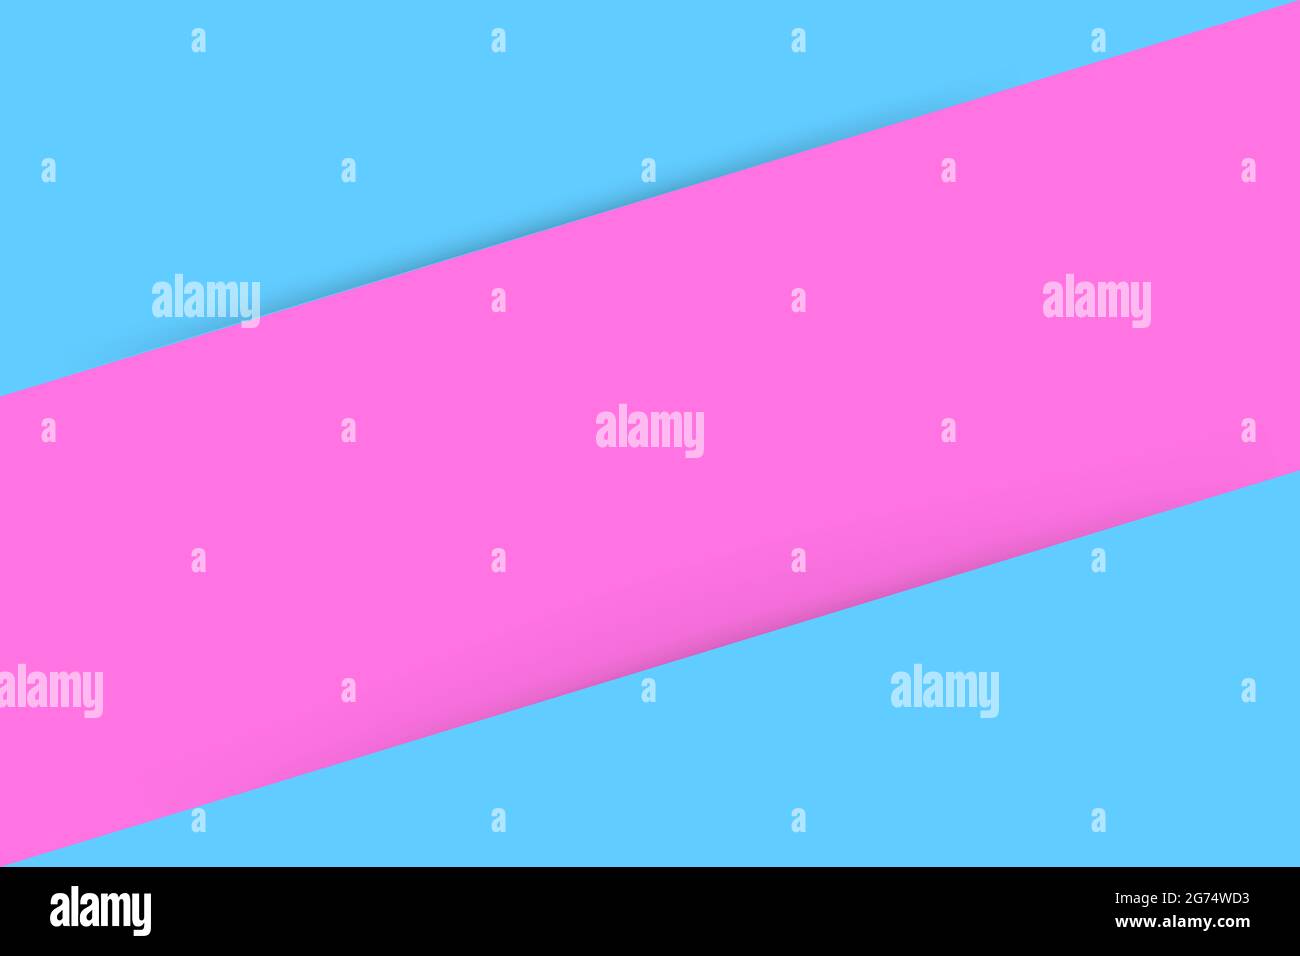 Template Triangle Blue and Pink with Diagonal Soft shadow for part or element design Stock Vector